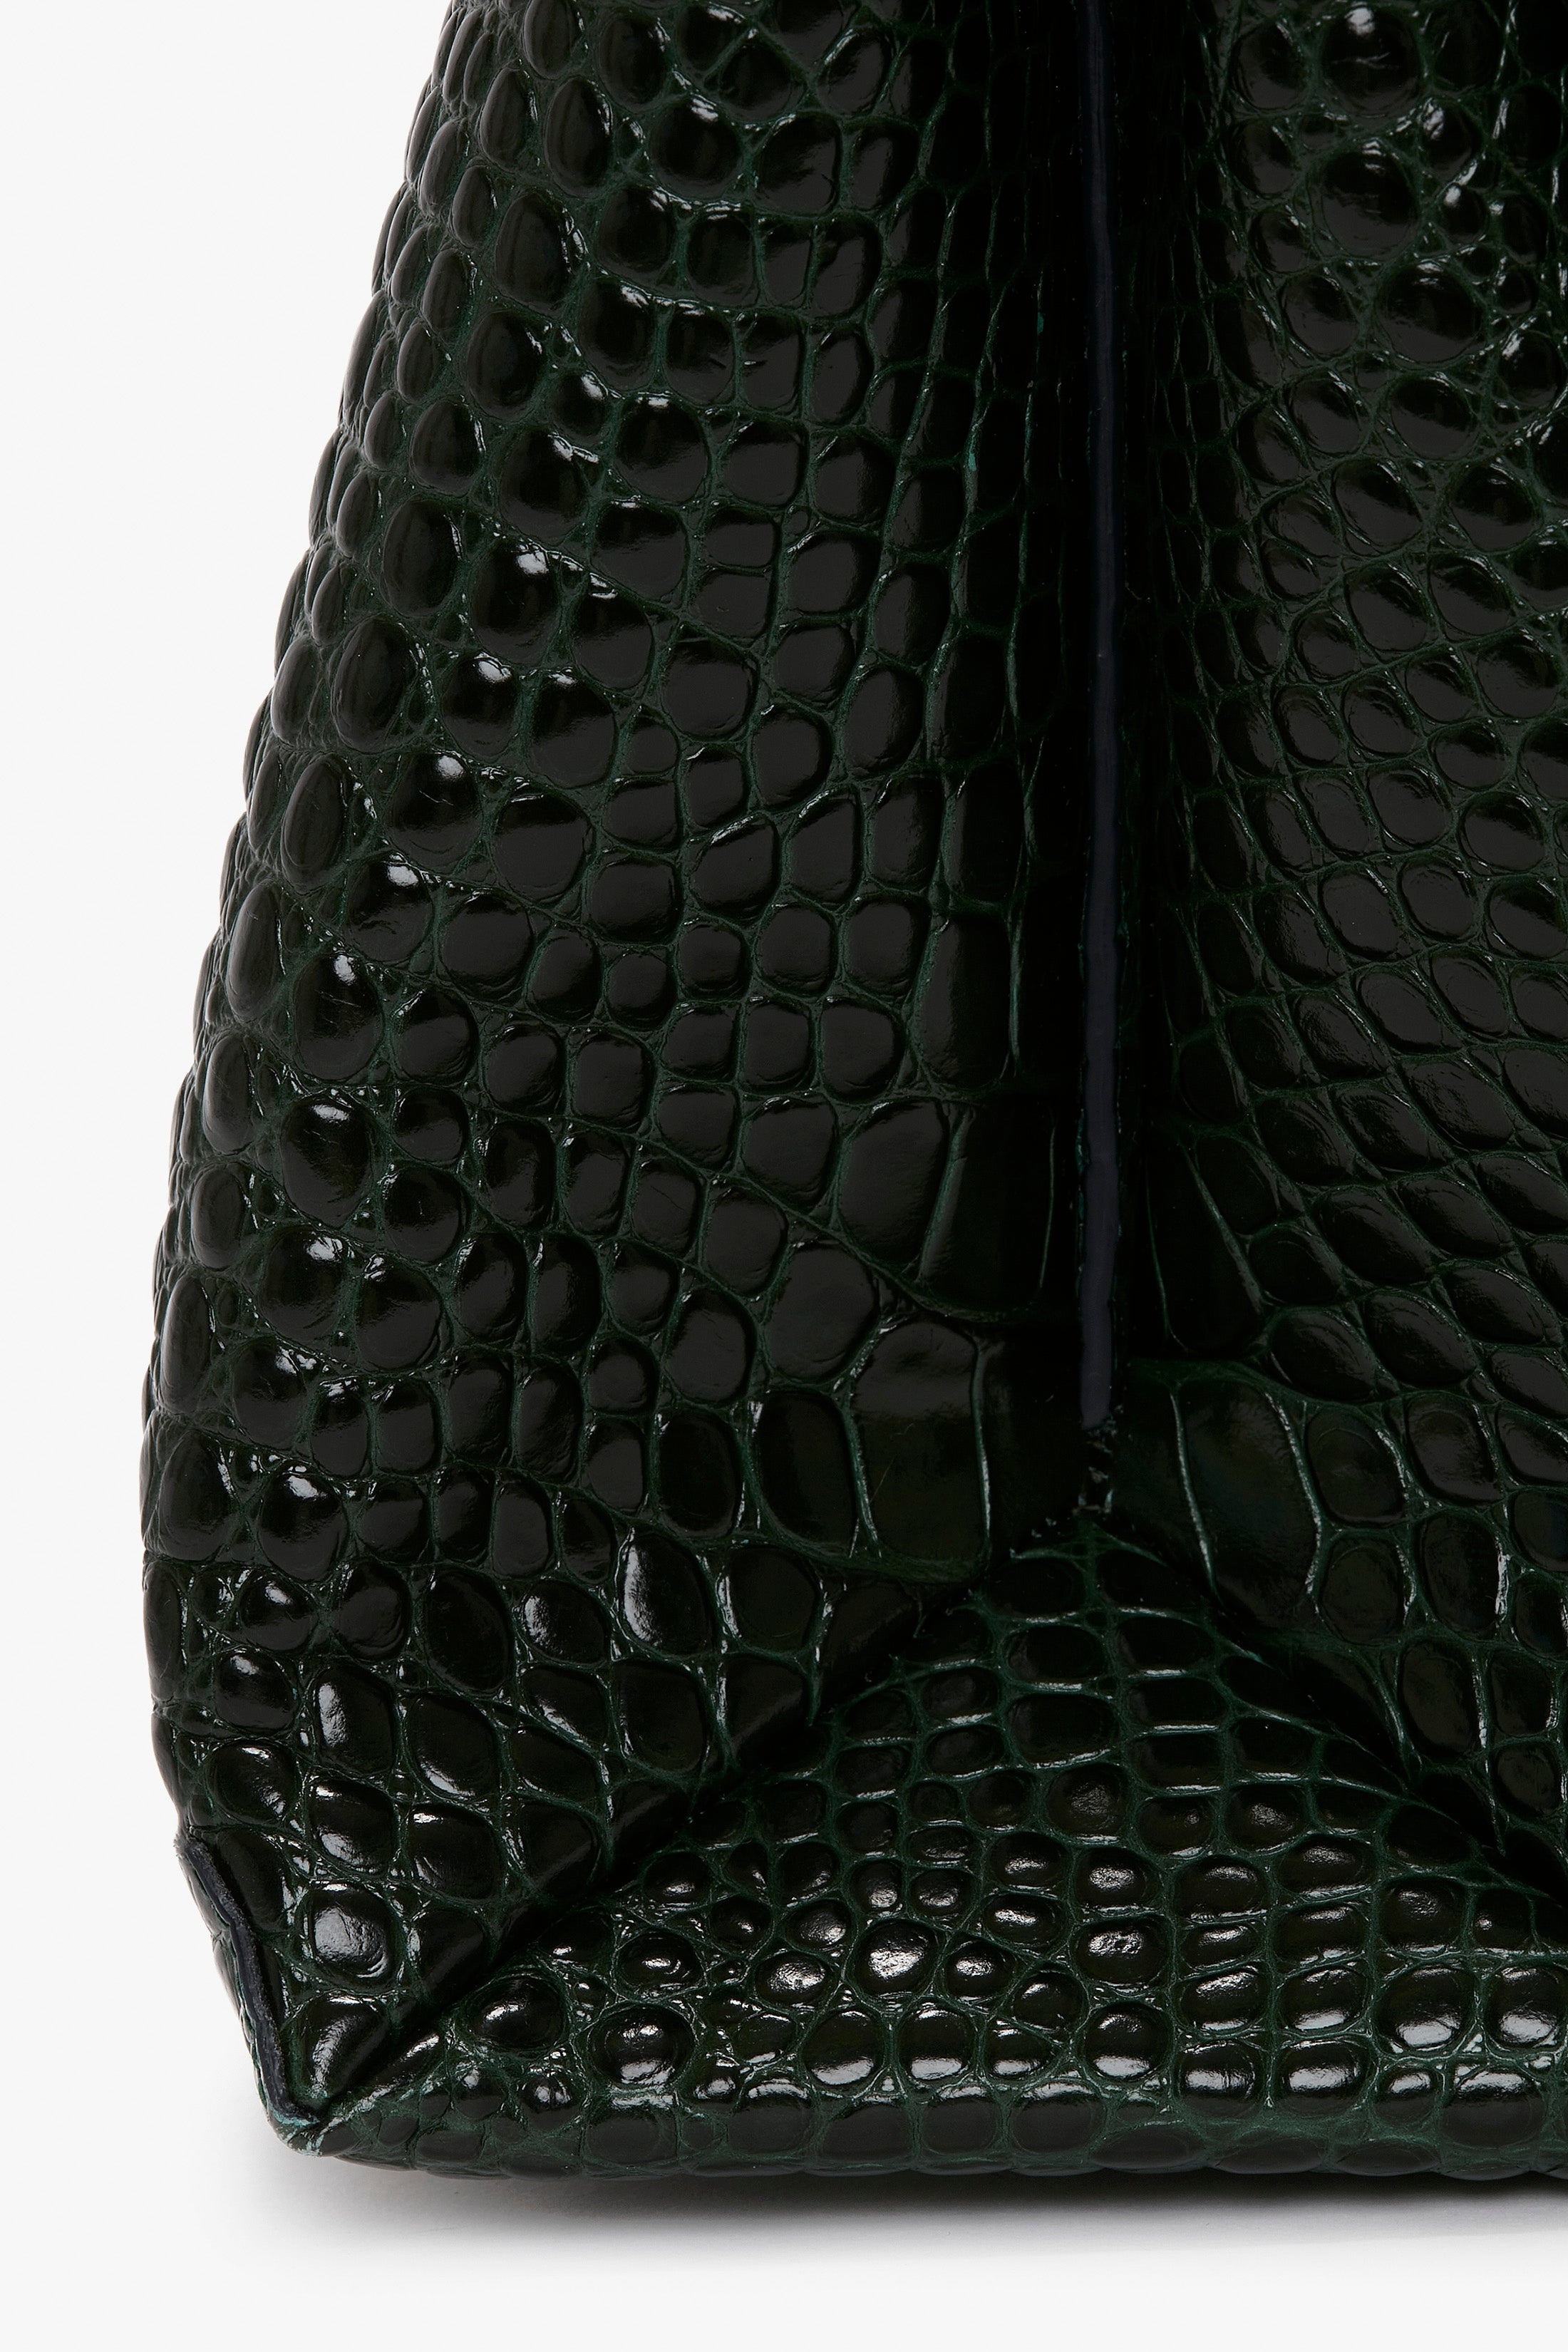 Jumbo Chain Pouch in Dark Forest Croc Leather - 10